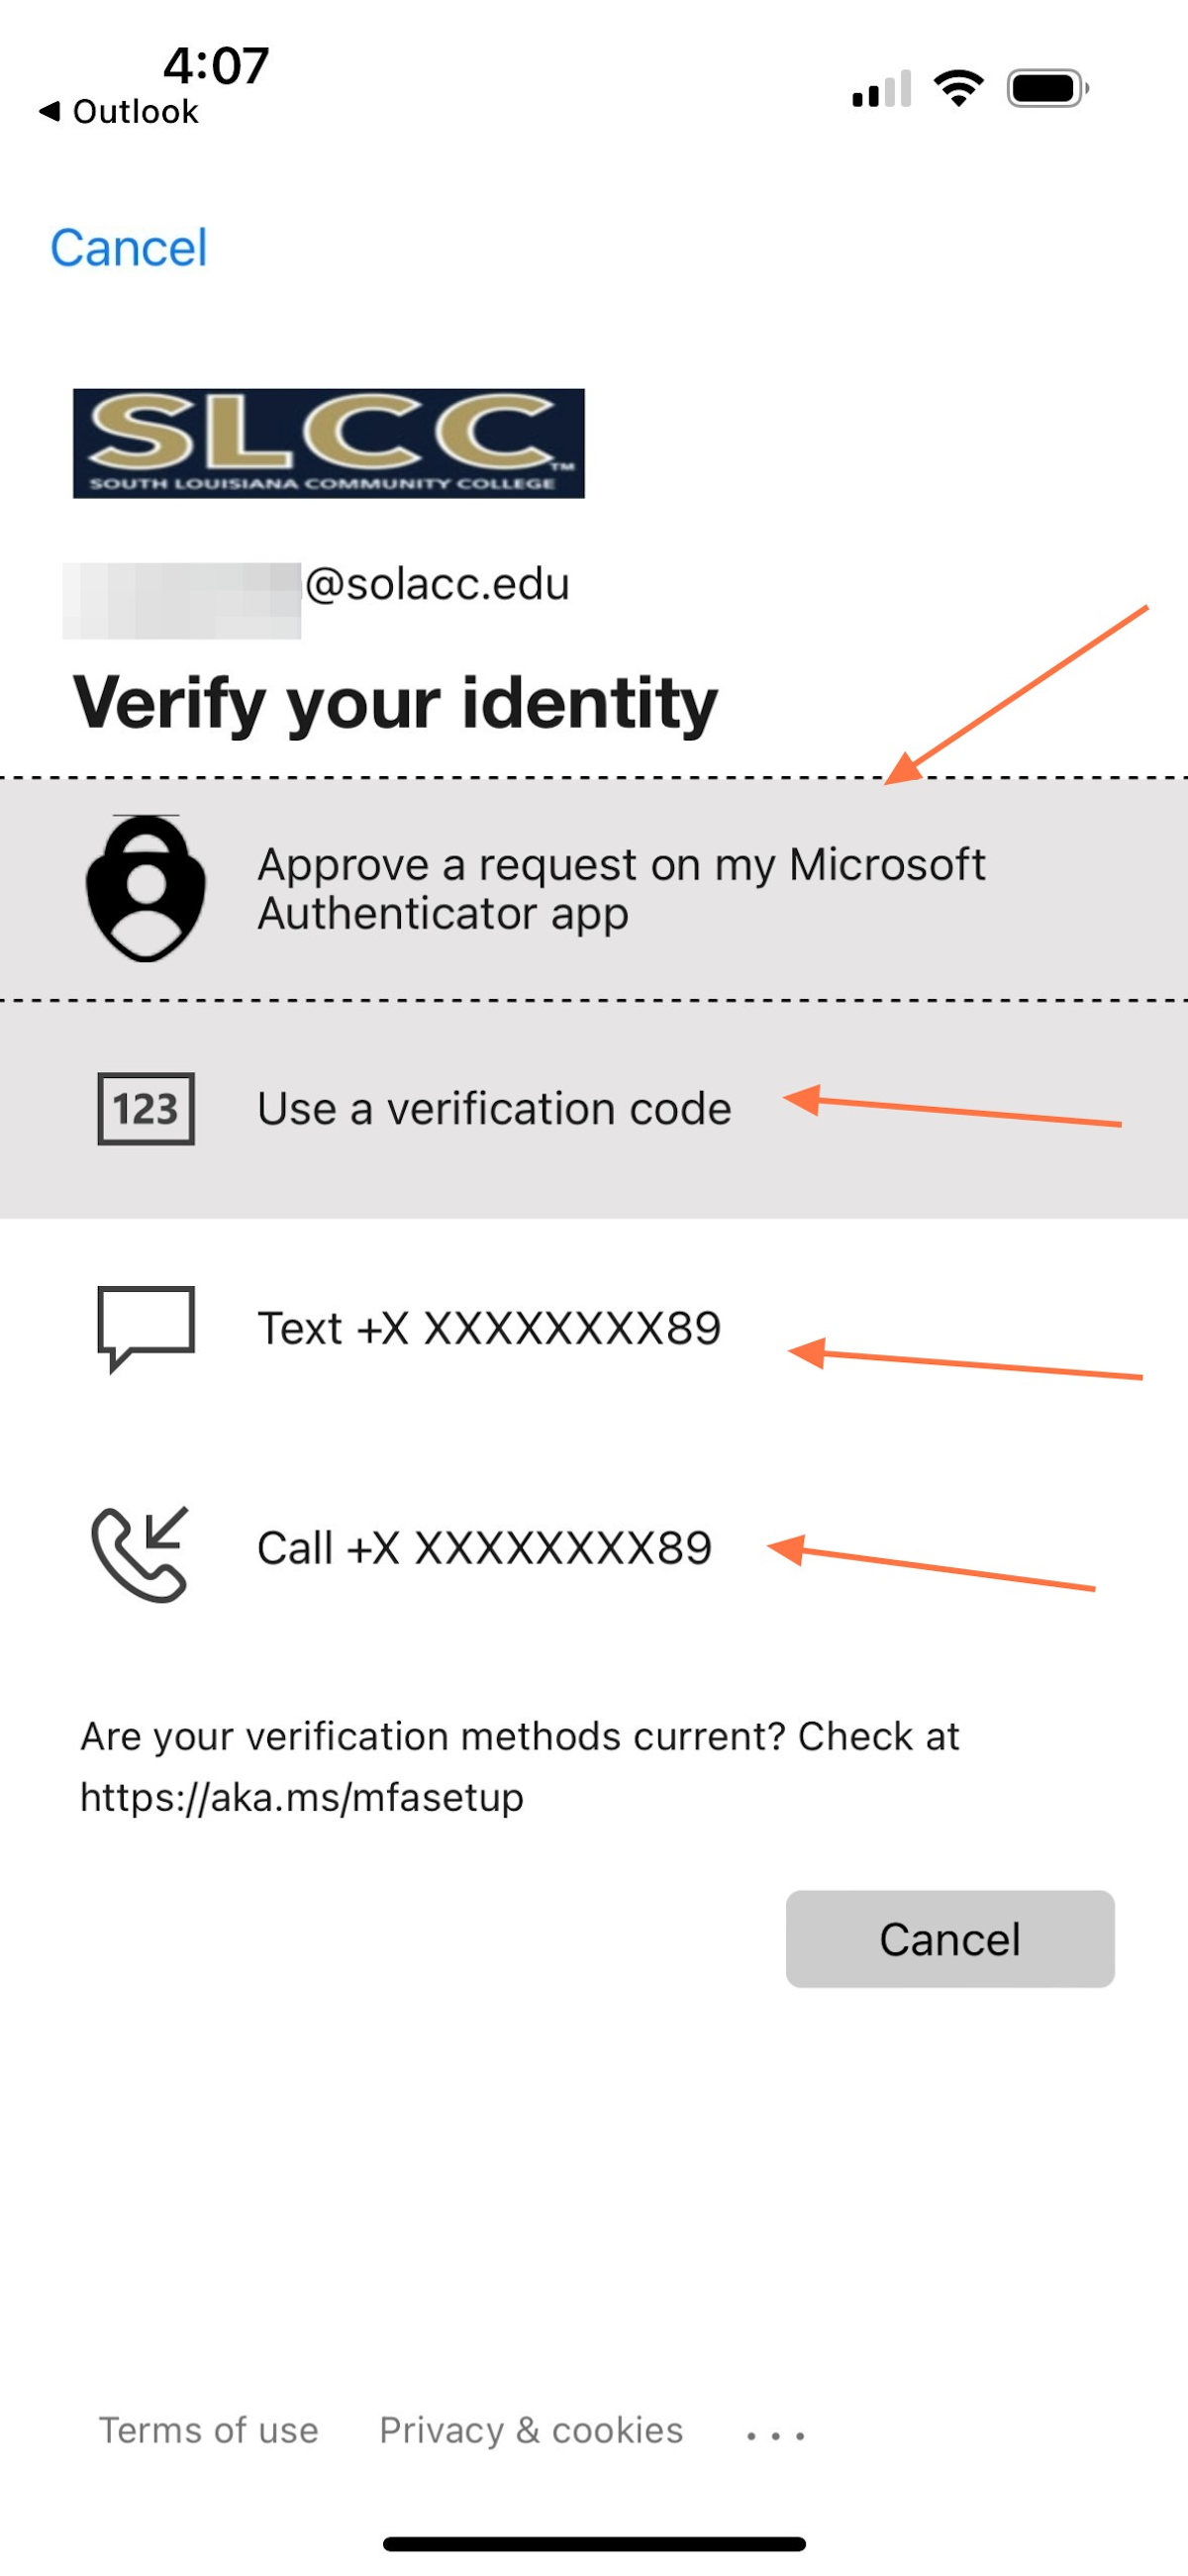 You'll then be asked to verify your identity.  Select one of the options you are given as you do when you login on campus.